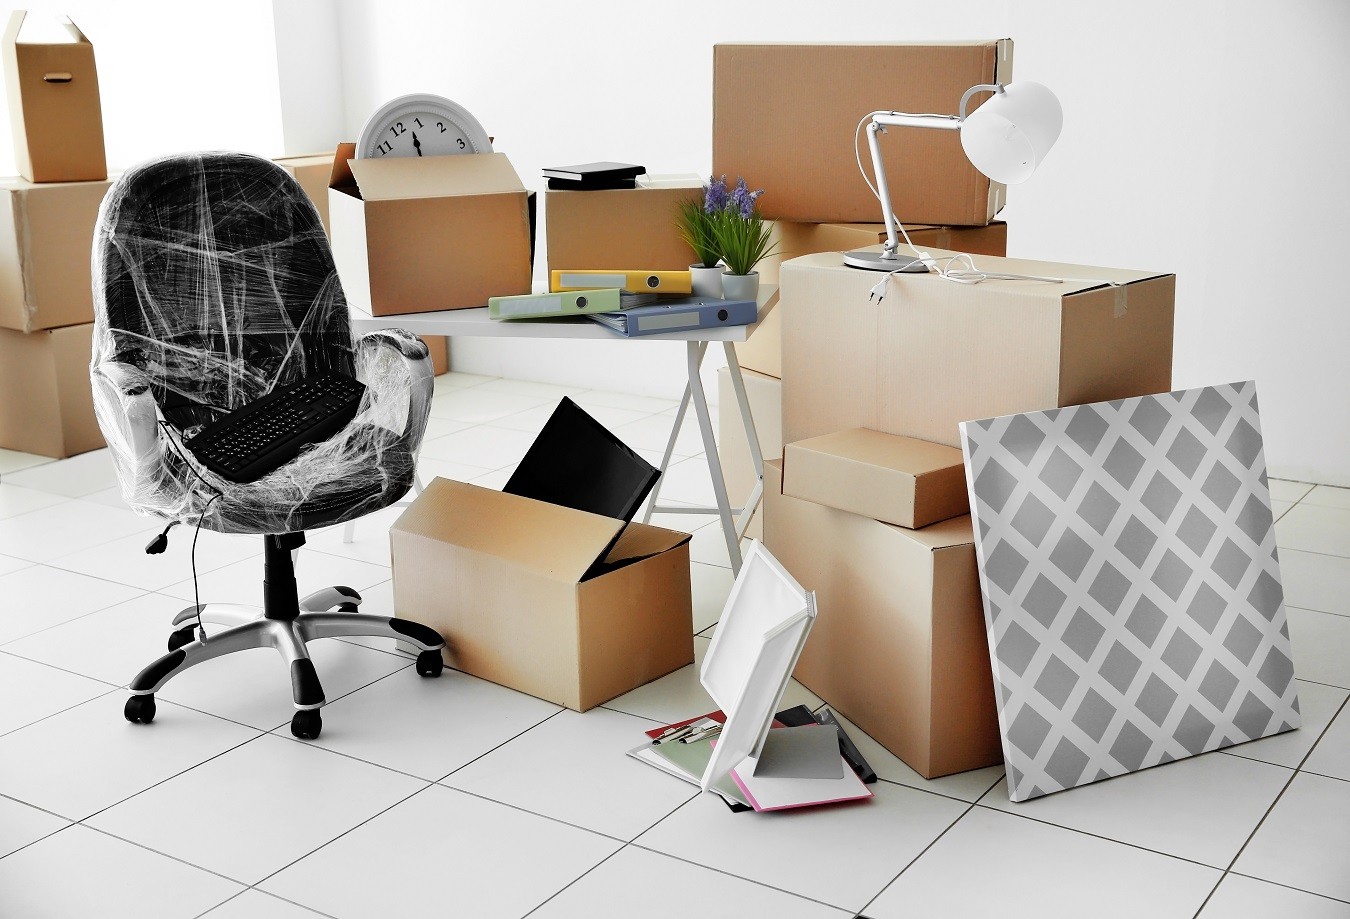 No time to move? We are your movers and packers Sydney! We Unpack, Declutter & reorganise your Home